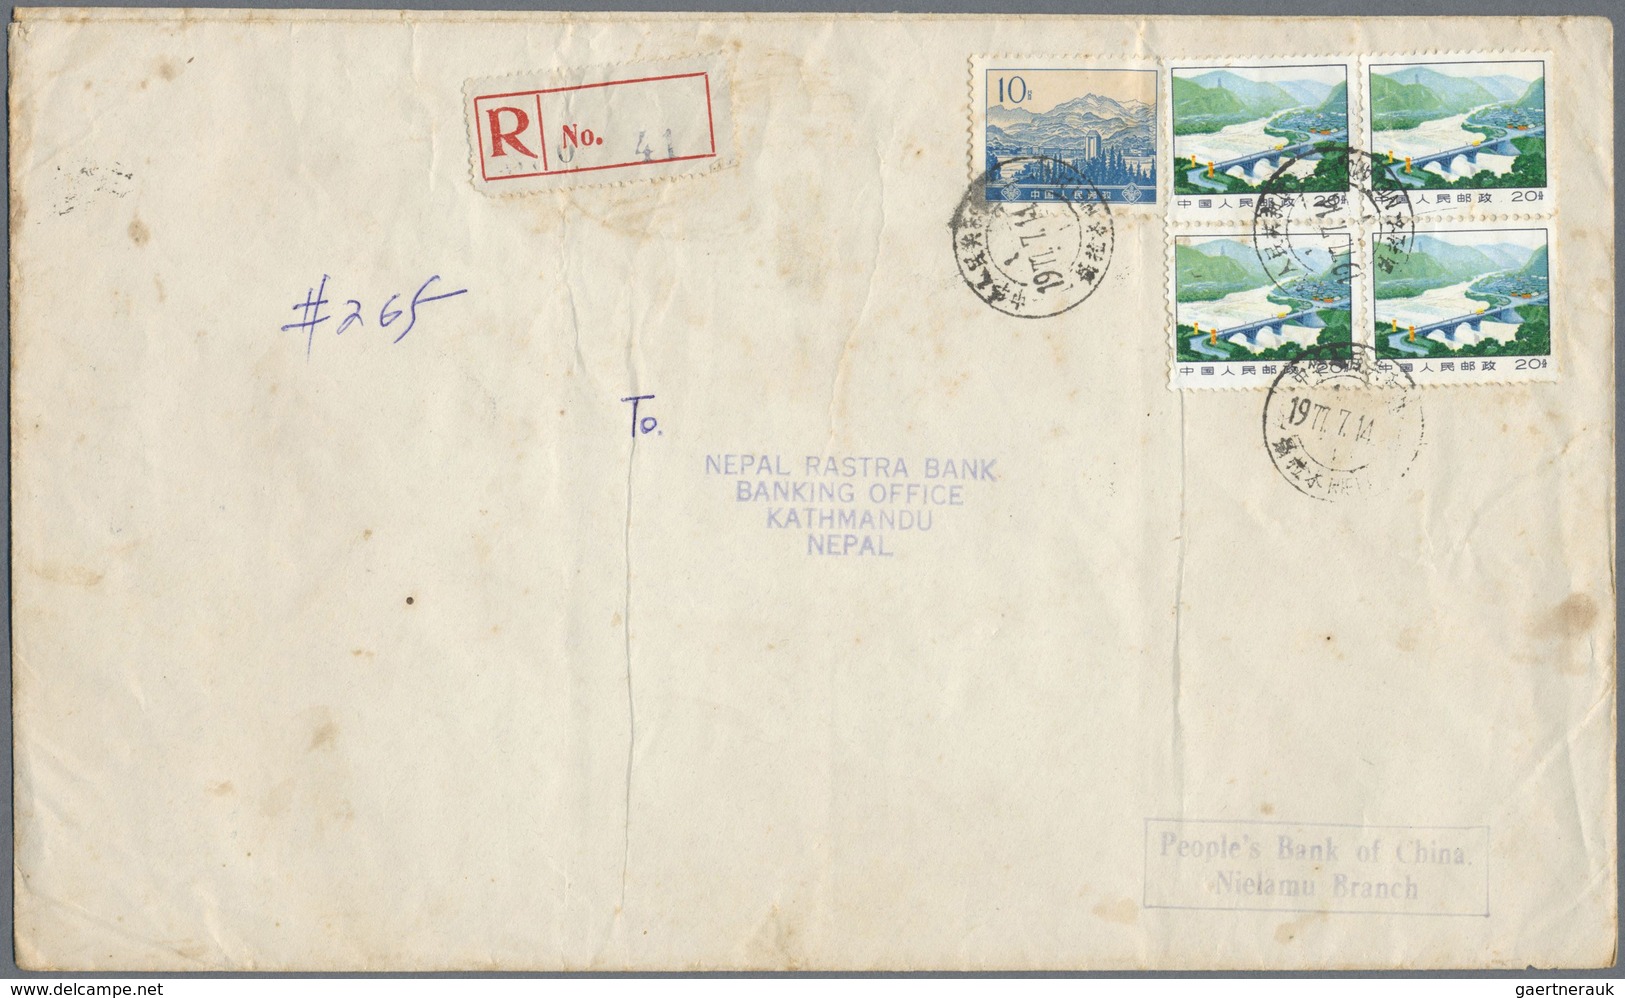 Br/ China - Volksrepublik: 1977/1986 (ca.), PRC used in Tibet: 1977 registered covers (14) from "People'